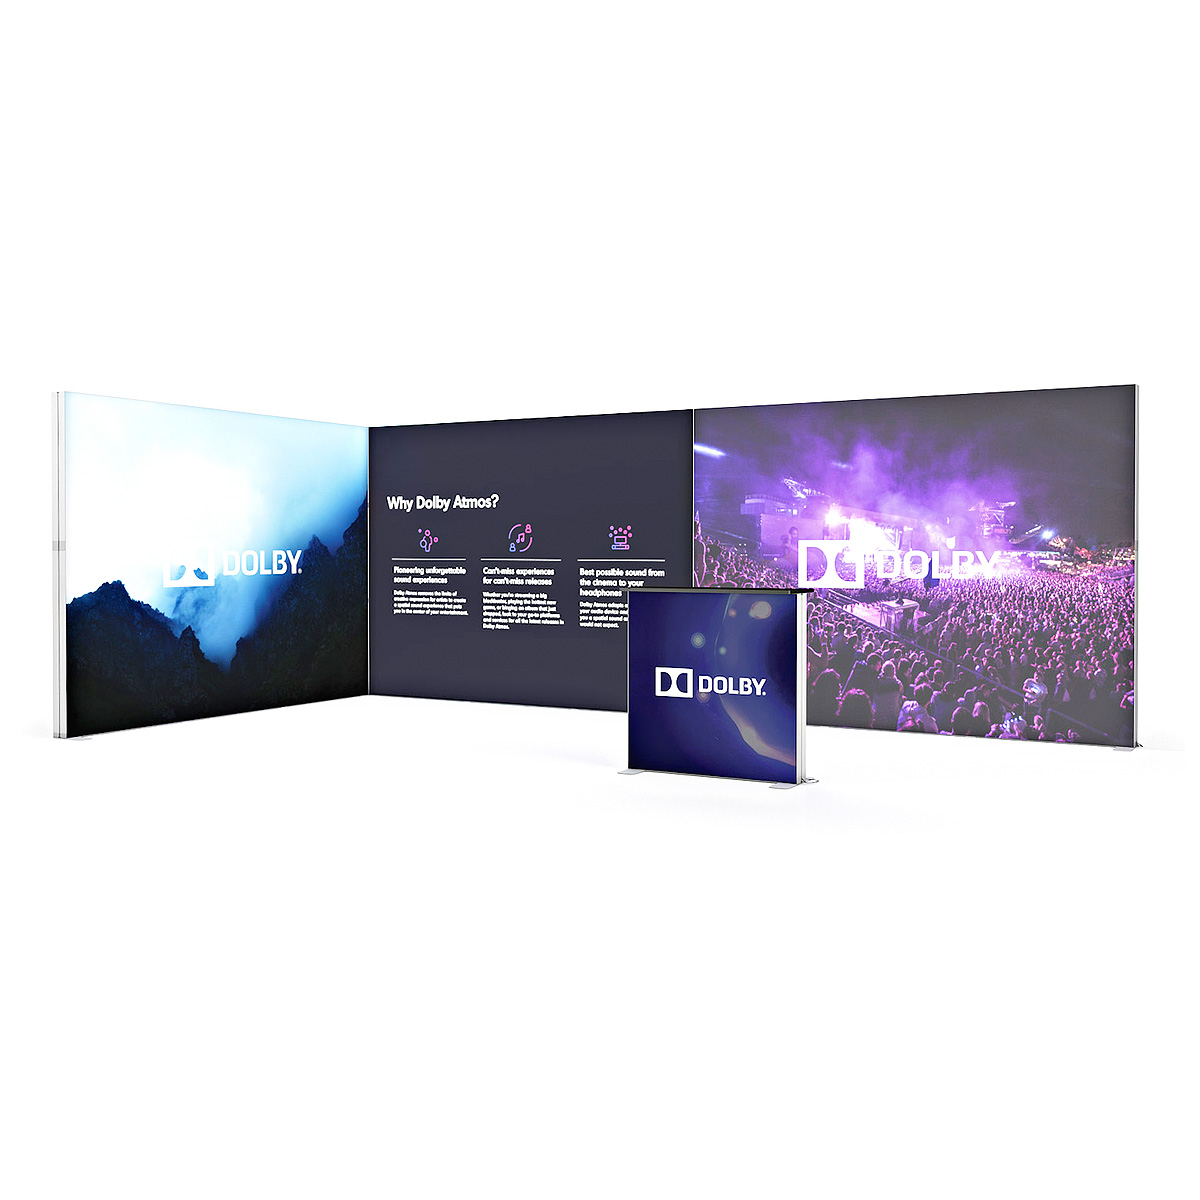 FABRILUX<sup>®</sup> 6x3 LED Lightbox Fabric Exhibition Stand Kit 25